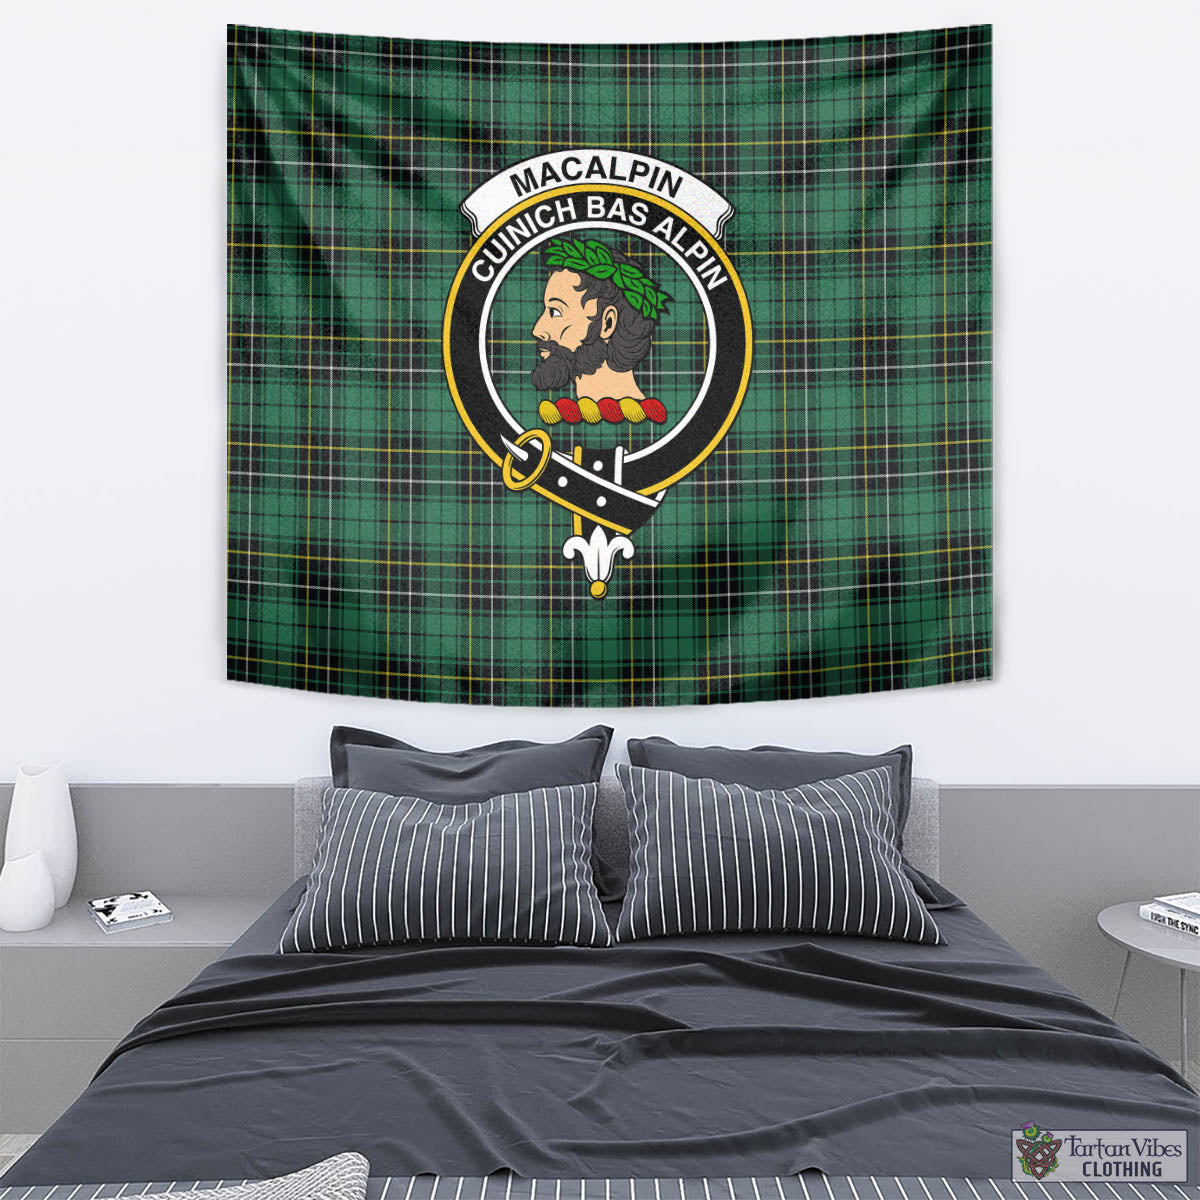 Tartan Vibes Clothing MacAlpin Ancient Tartan Tapestry Wall Hanging and Home Decor for Room with Family Crest